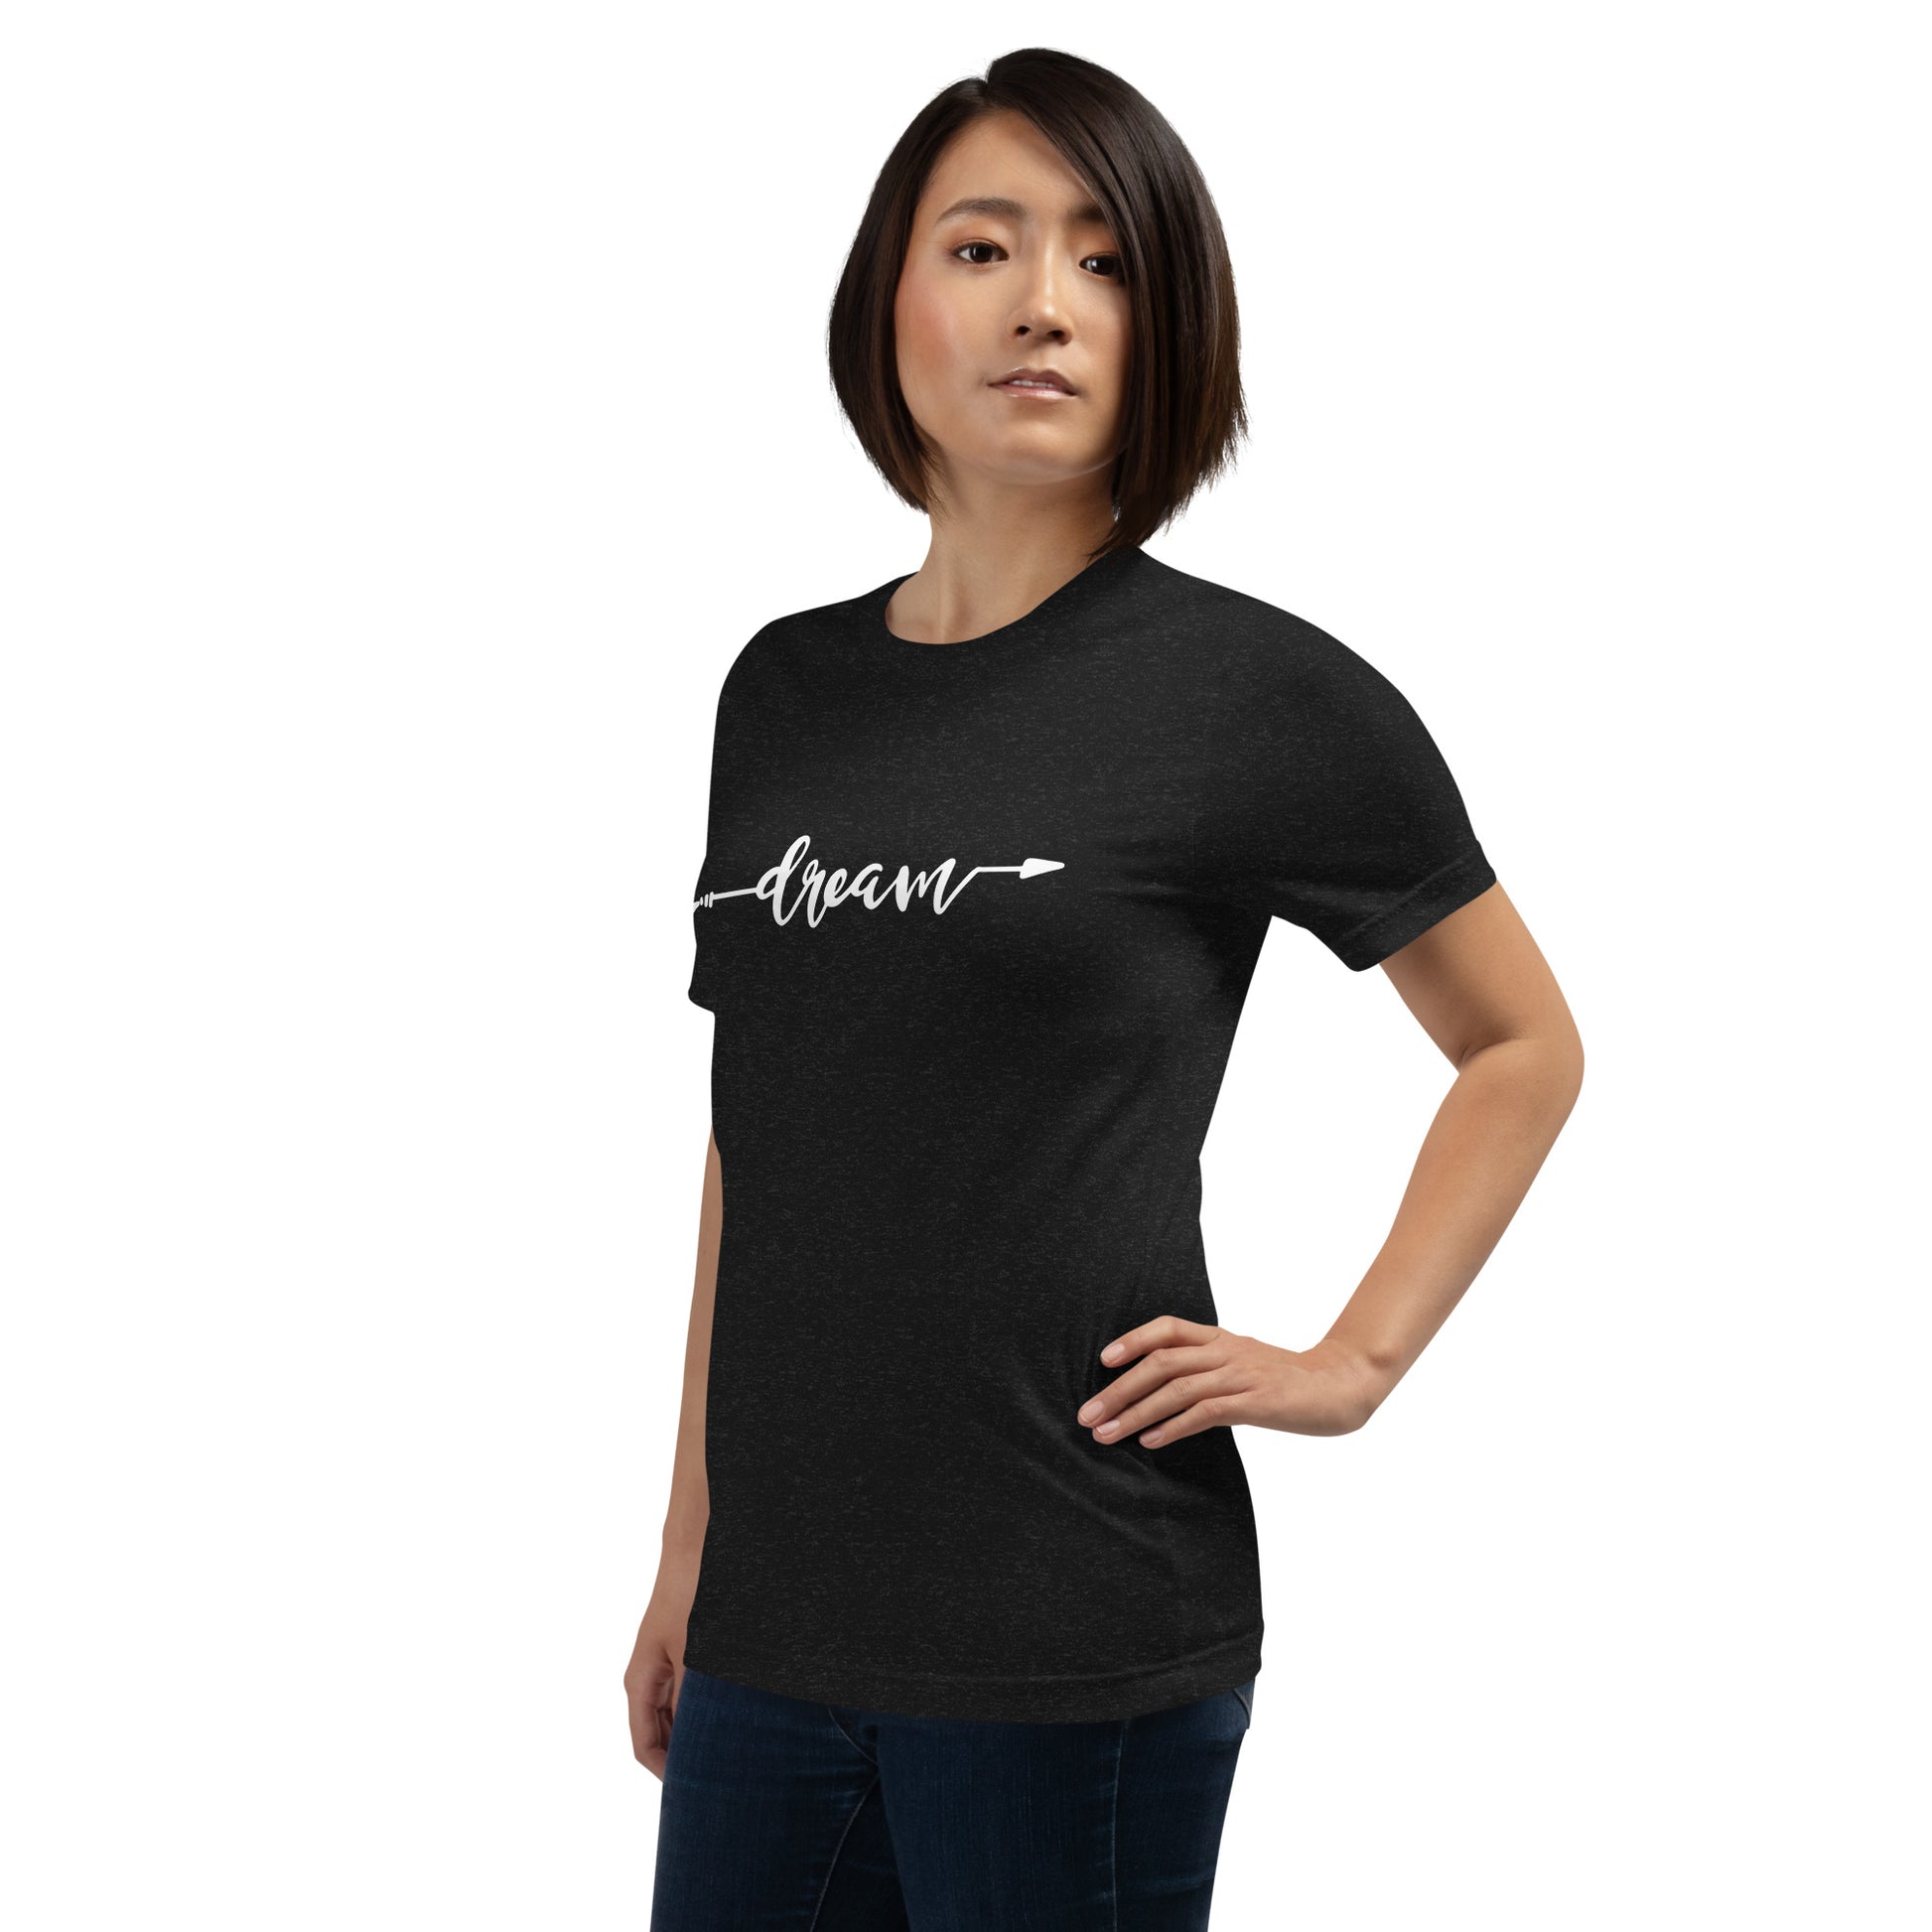 "Dream" Women's T-Shirt - Weave Got Gifts - Unique Gifts You Won’t Find Anywhere Else!